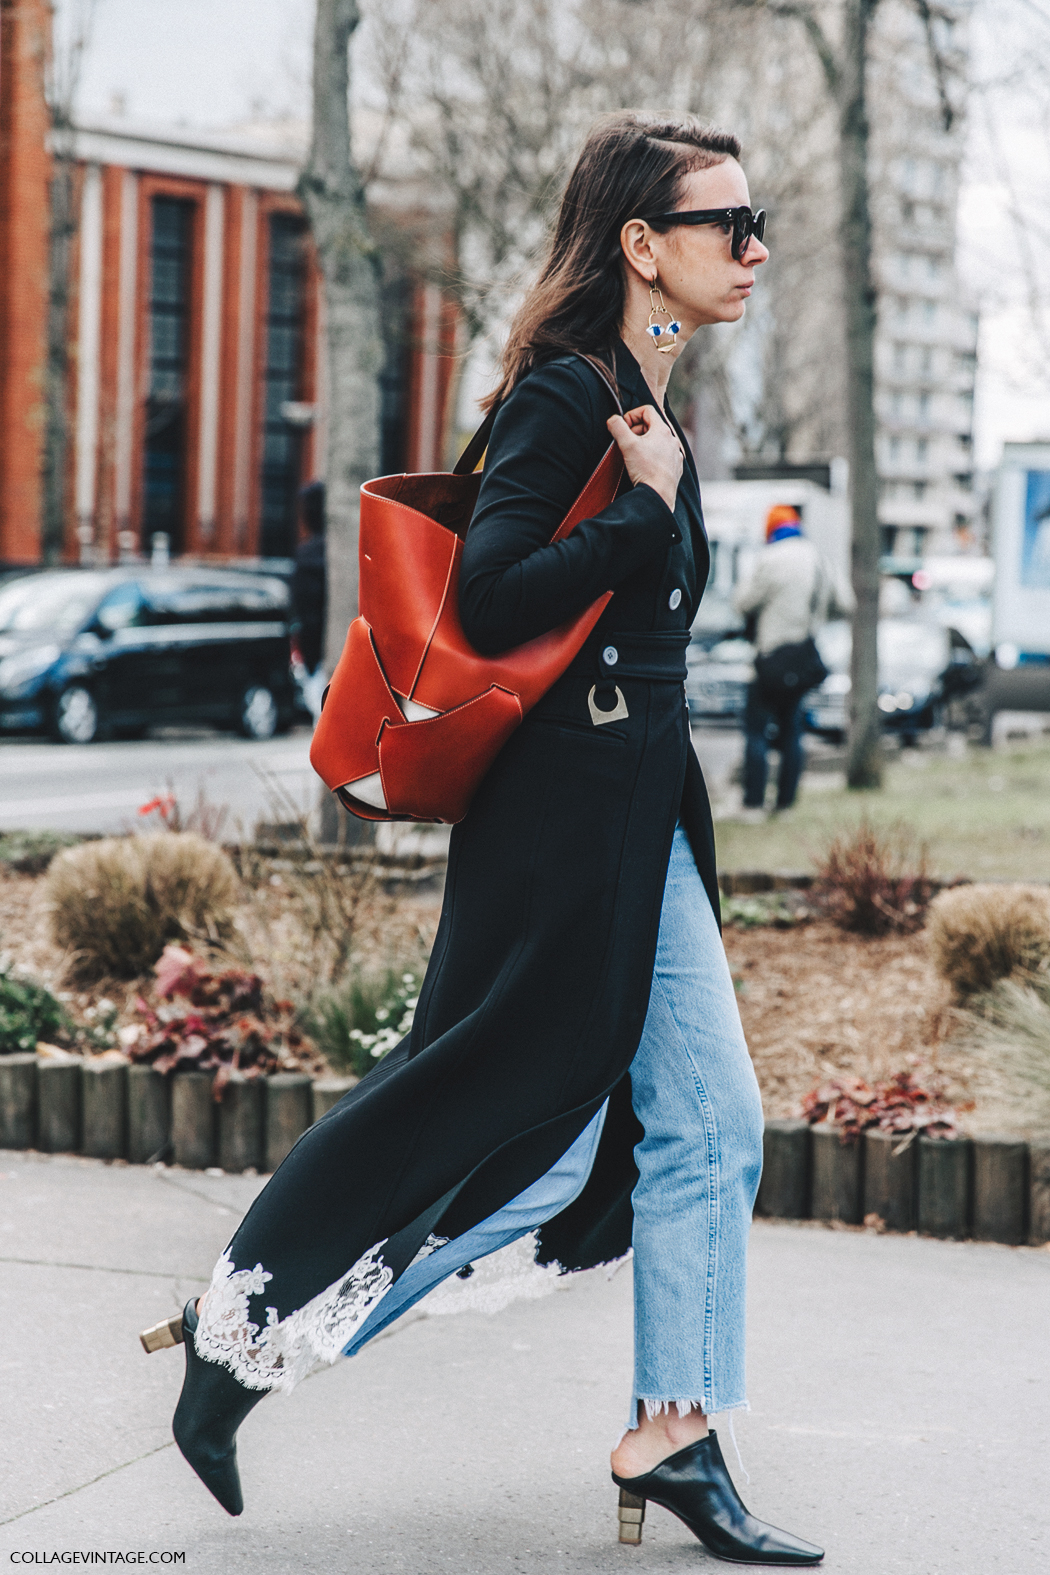 Celine Boots, Street Style, Outfit Inspo, Outfit Envy, Street Chic, Style, Fashion